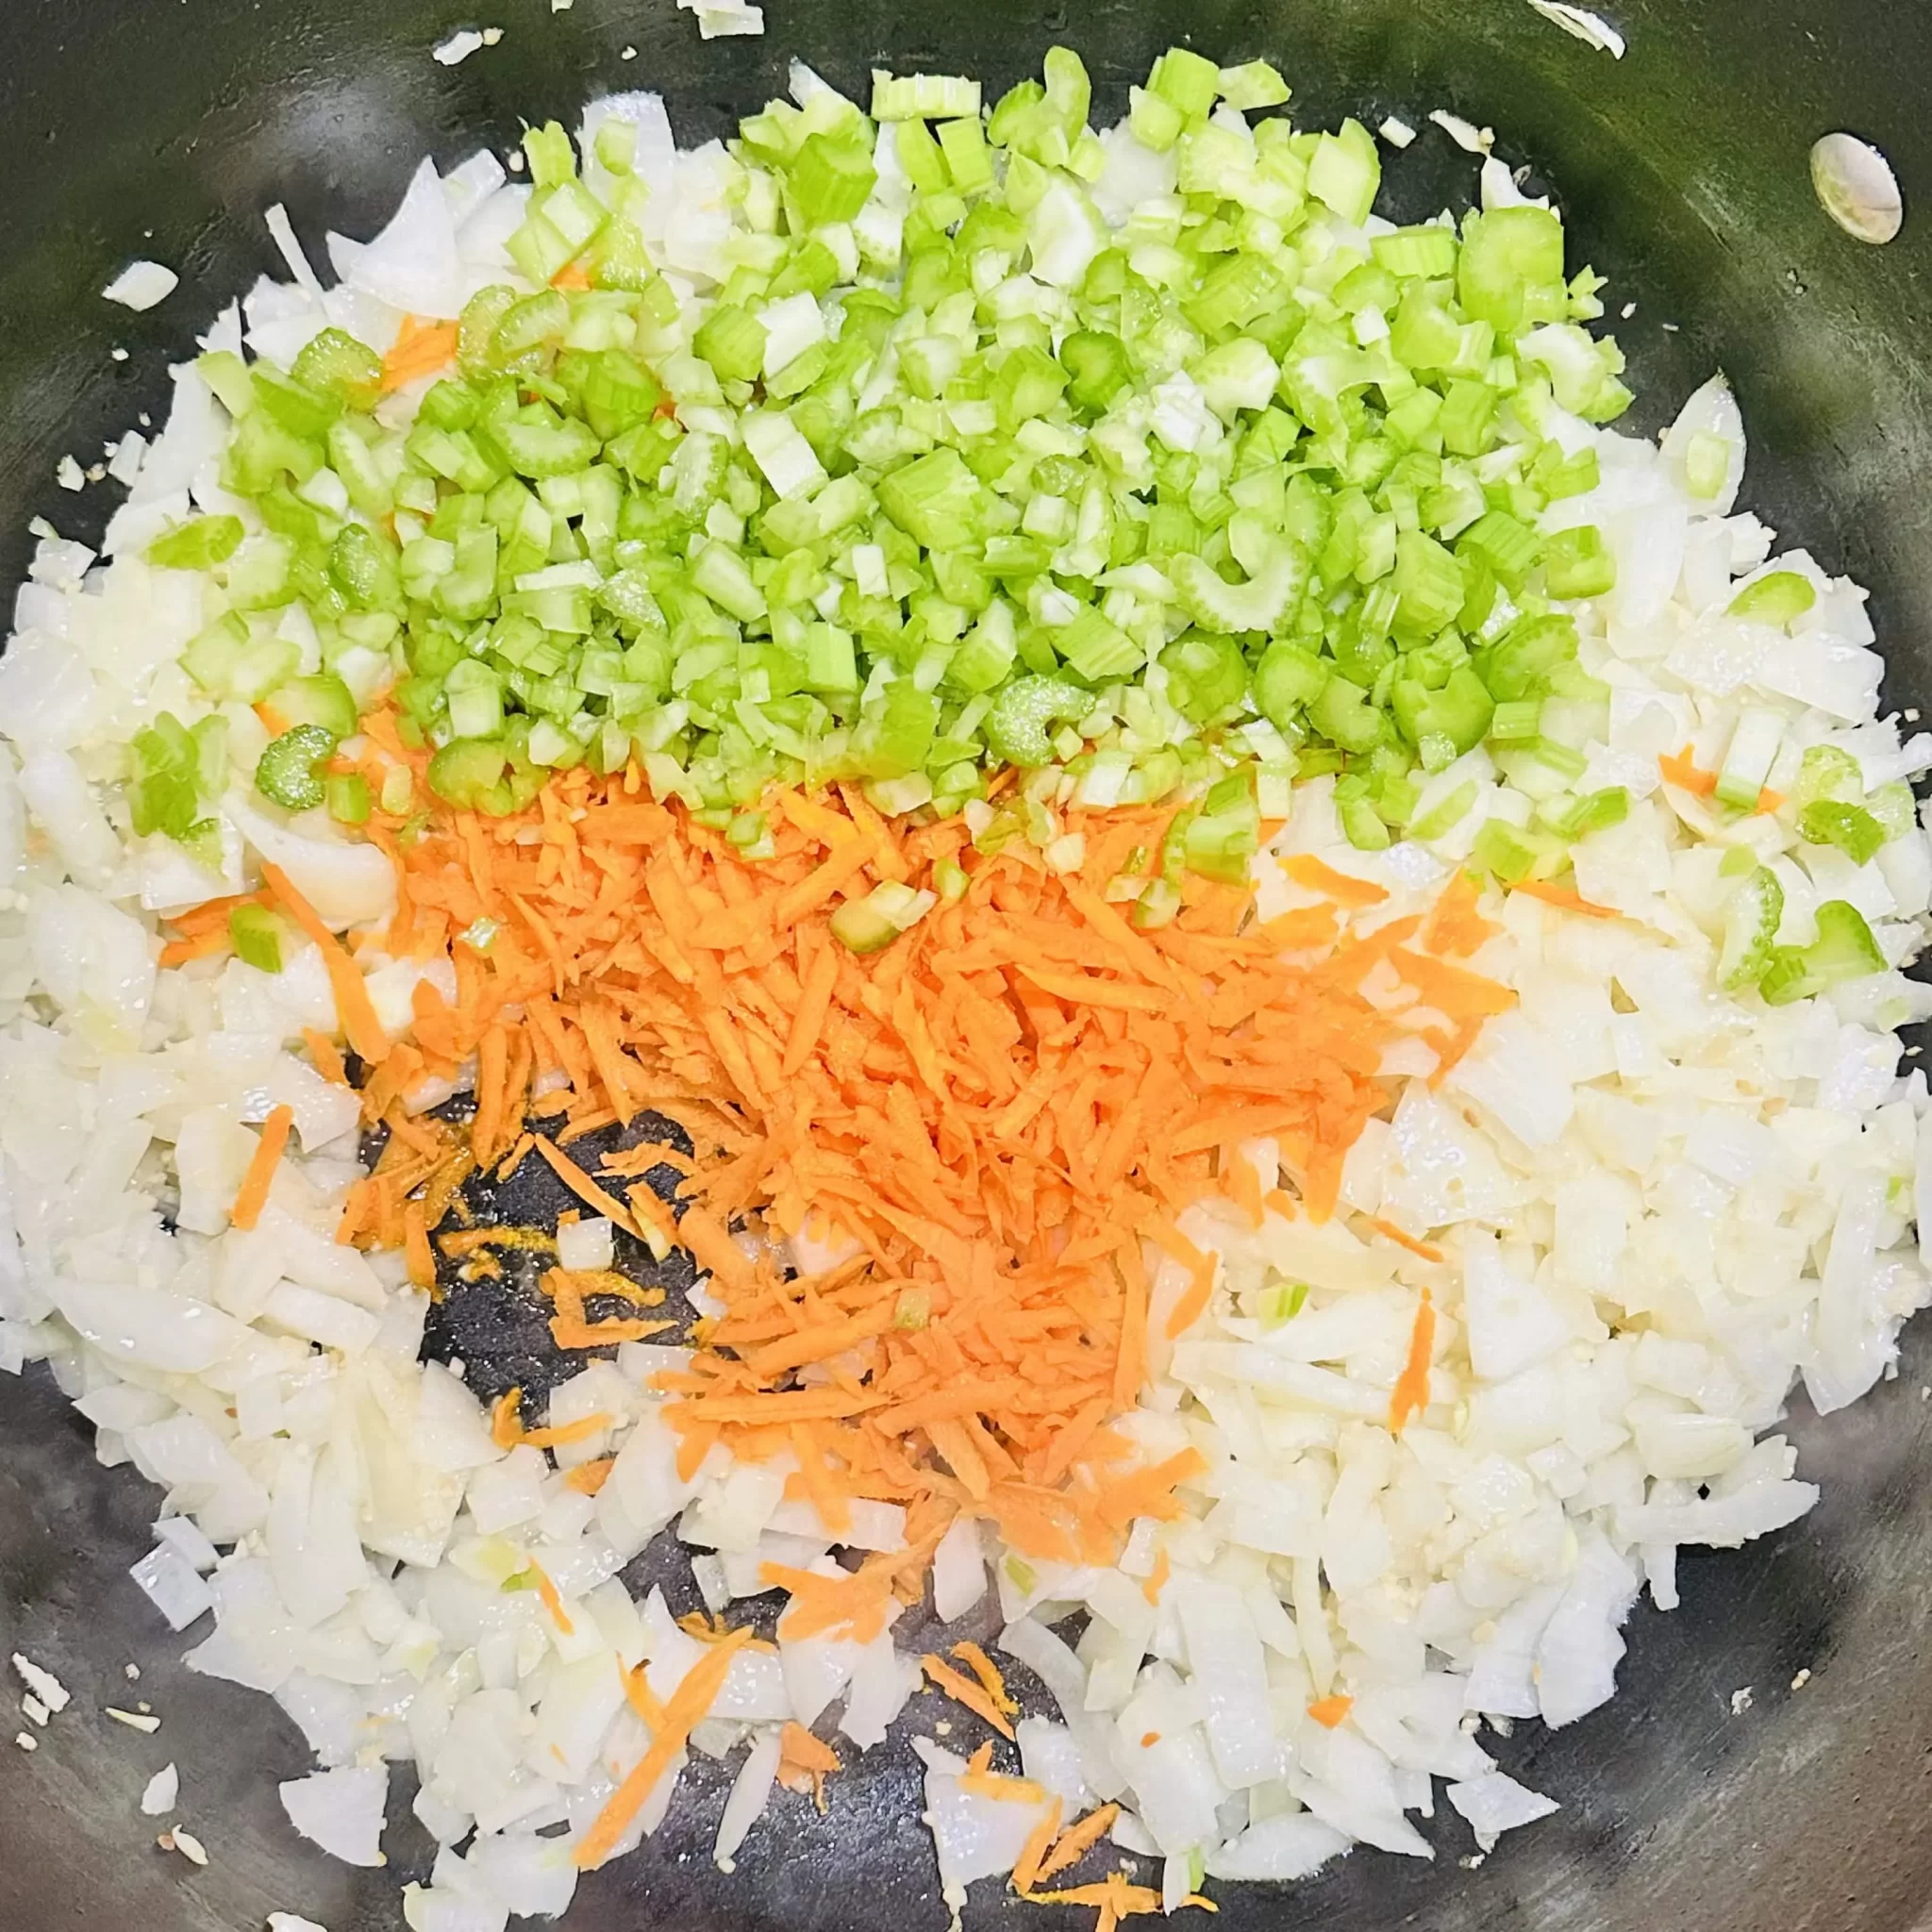 Chopped onions carrots and celery